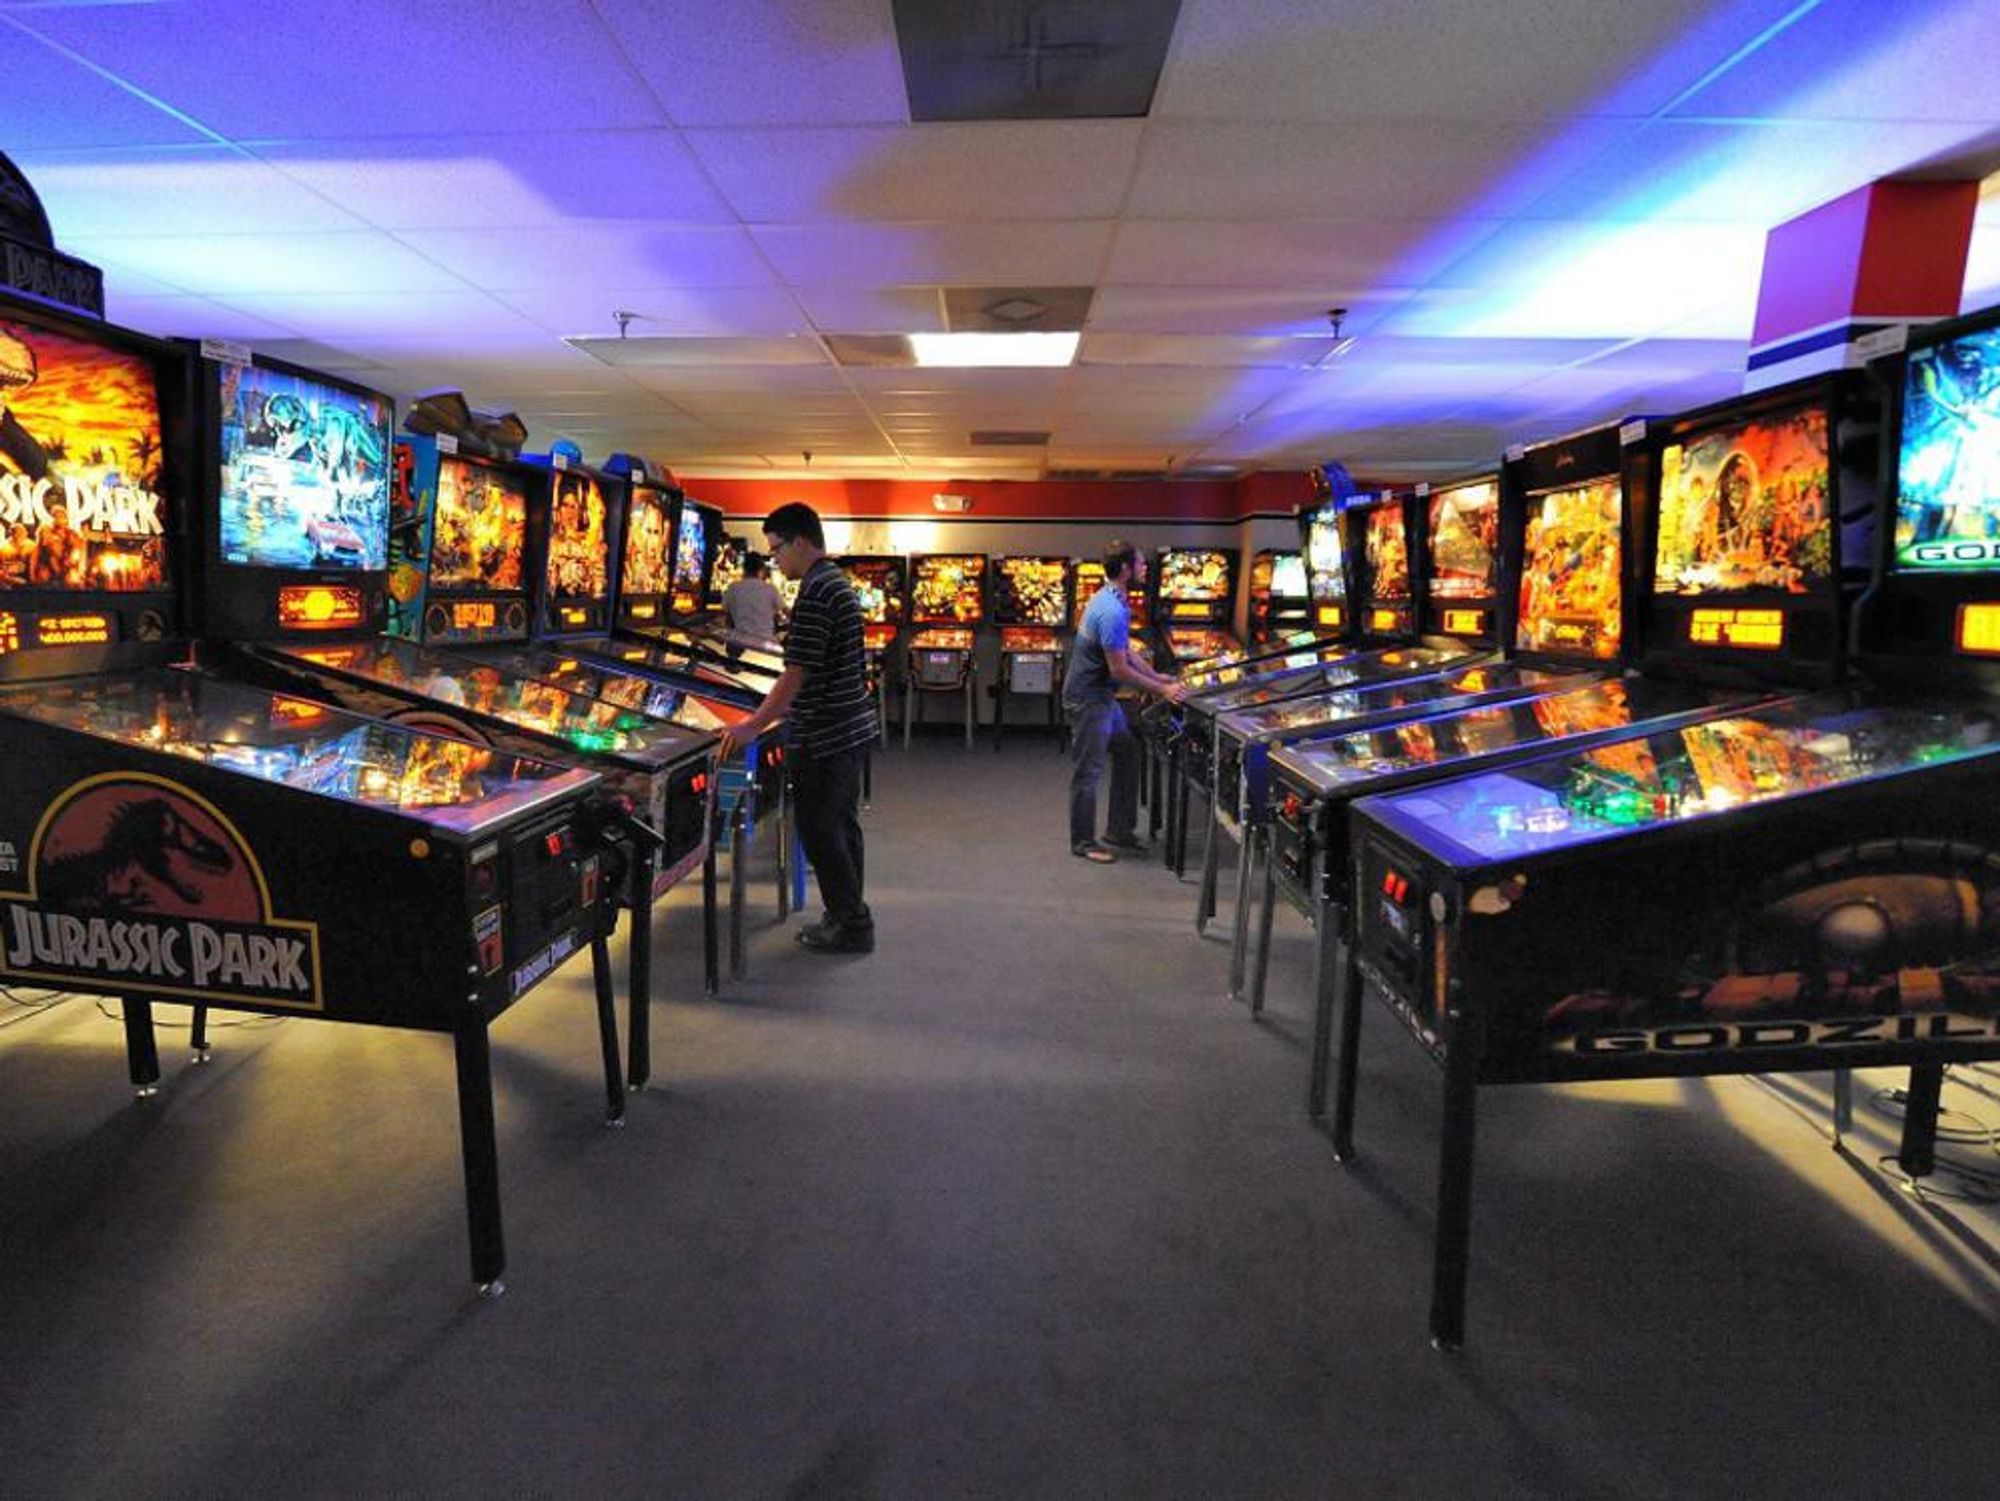 Pinballz Arcade offers a huge facility packed to the gills with games